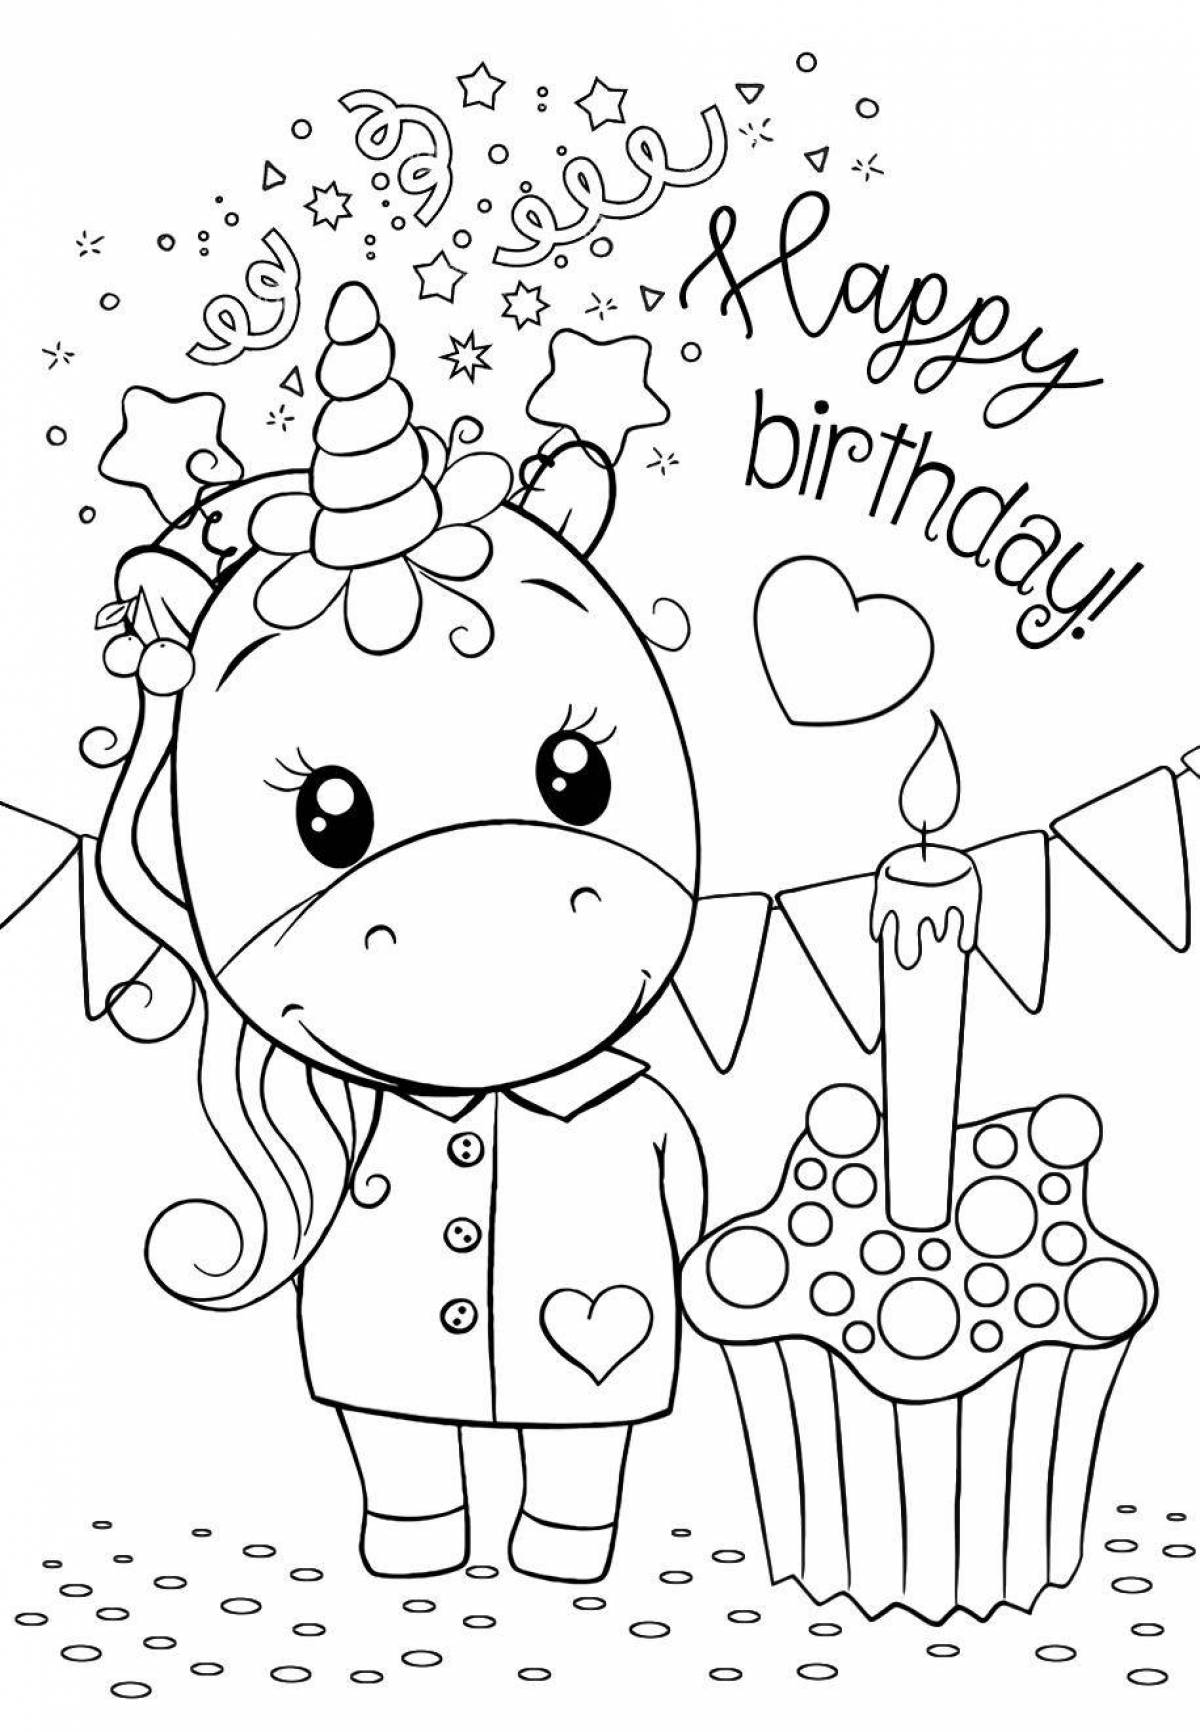 Blooming happy birthday coloring page